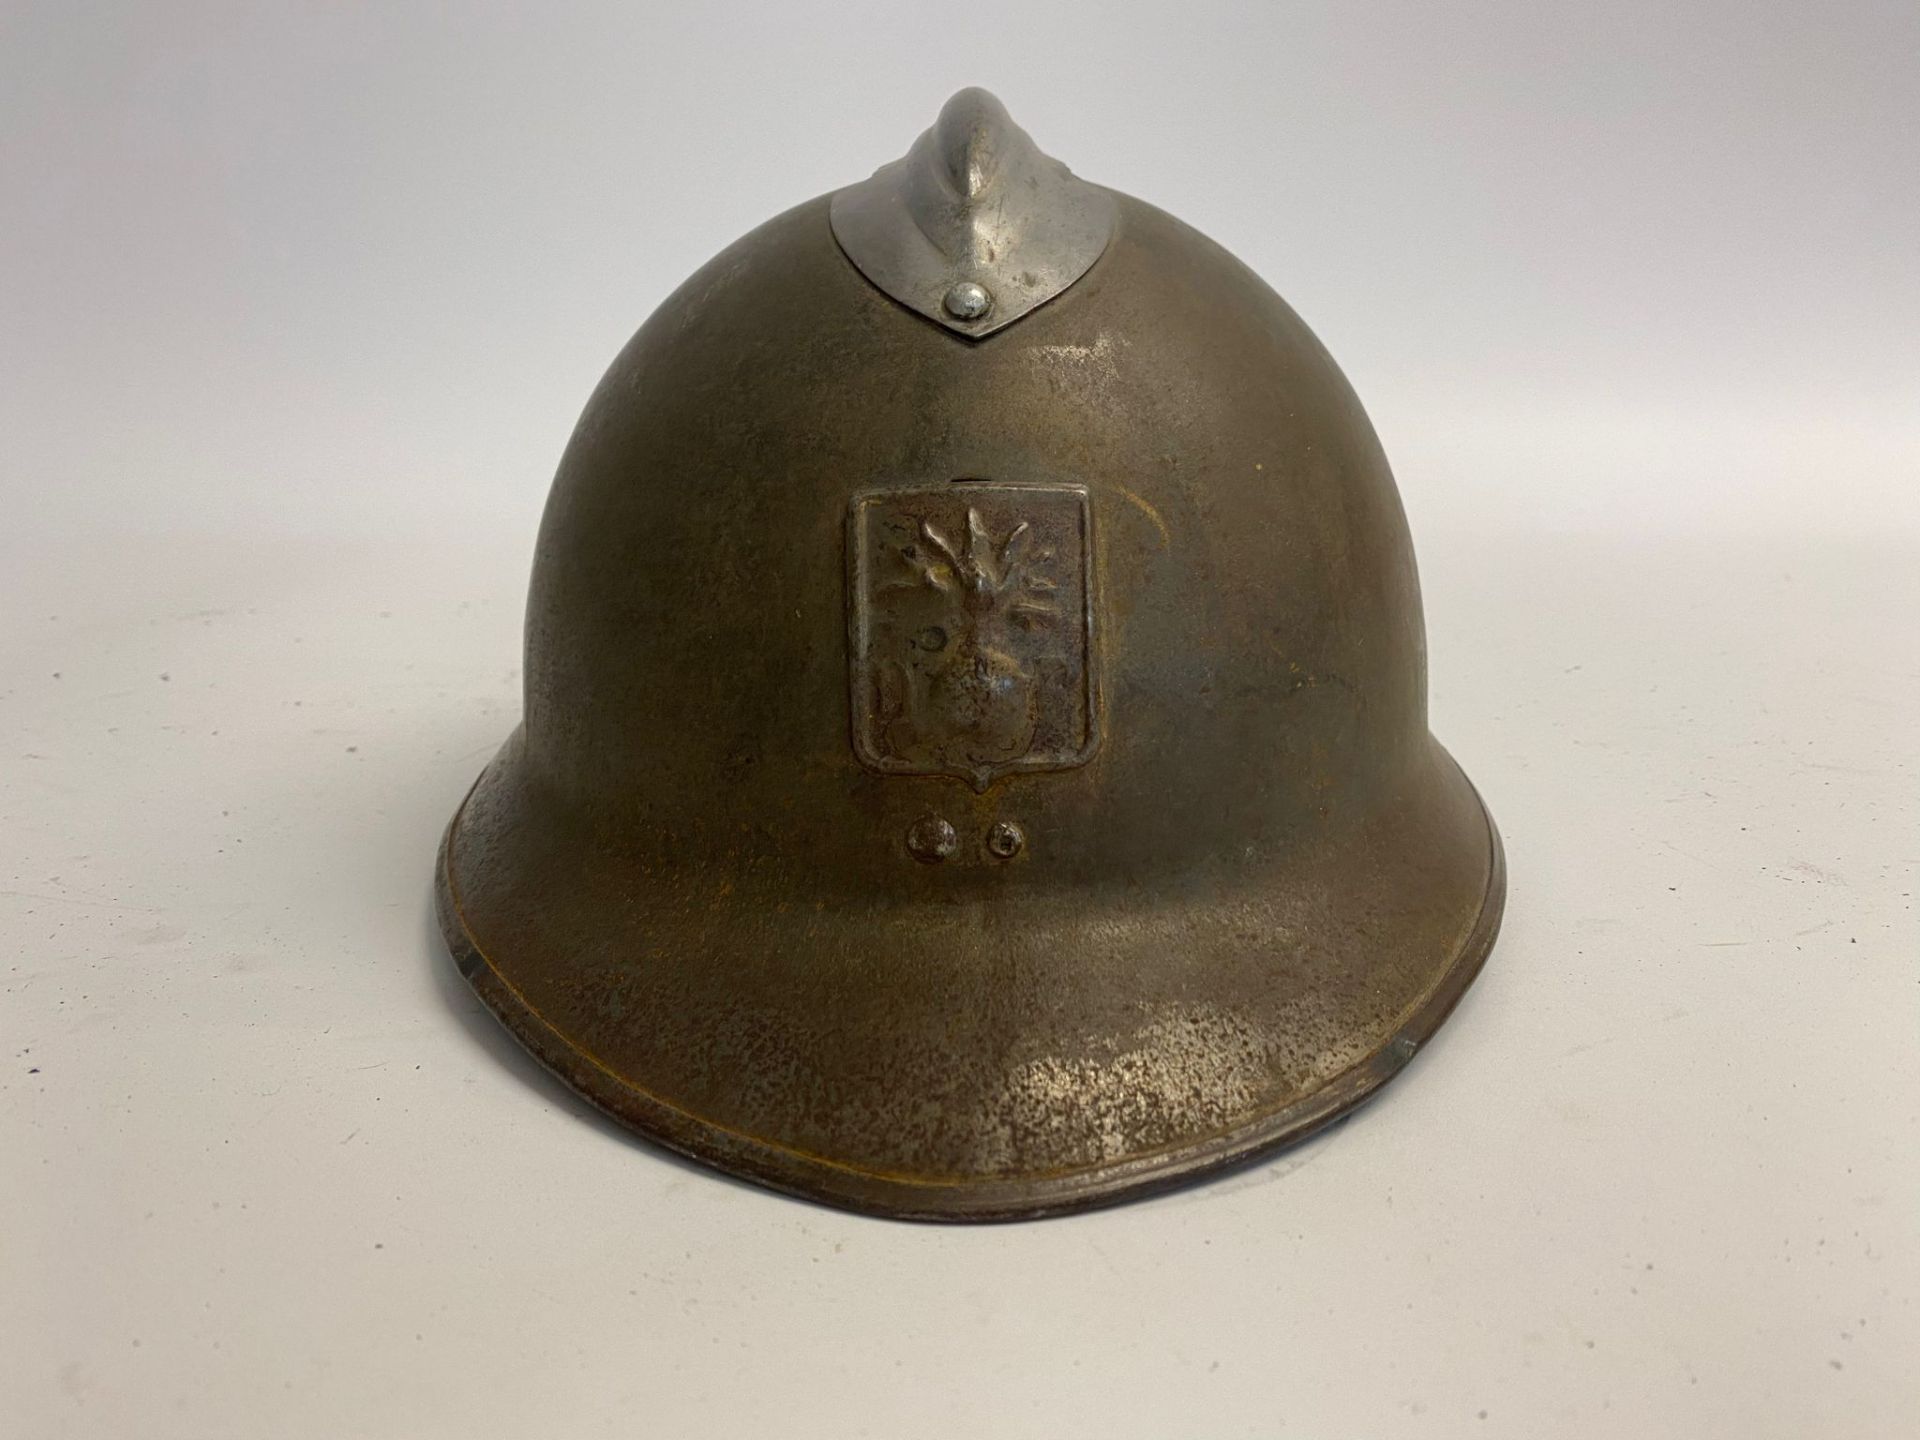 A French civil defence M26 Adrian helmet. This lot will be available to collect in person 48 hours